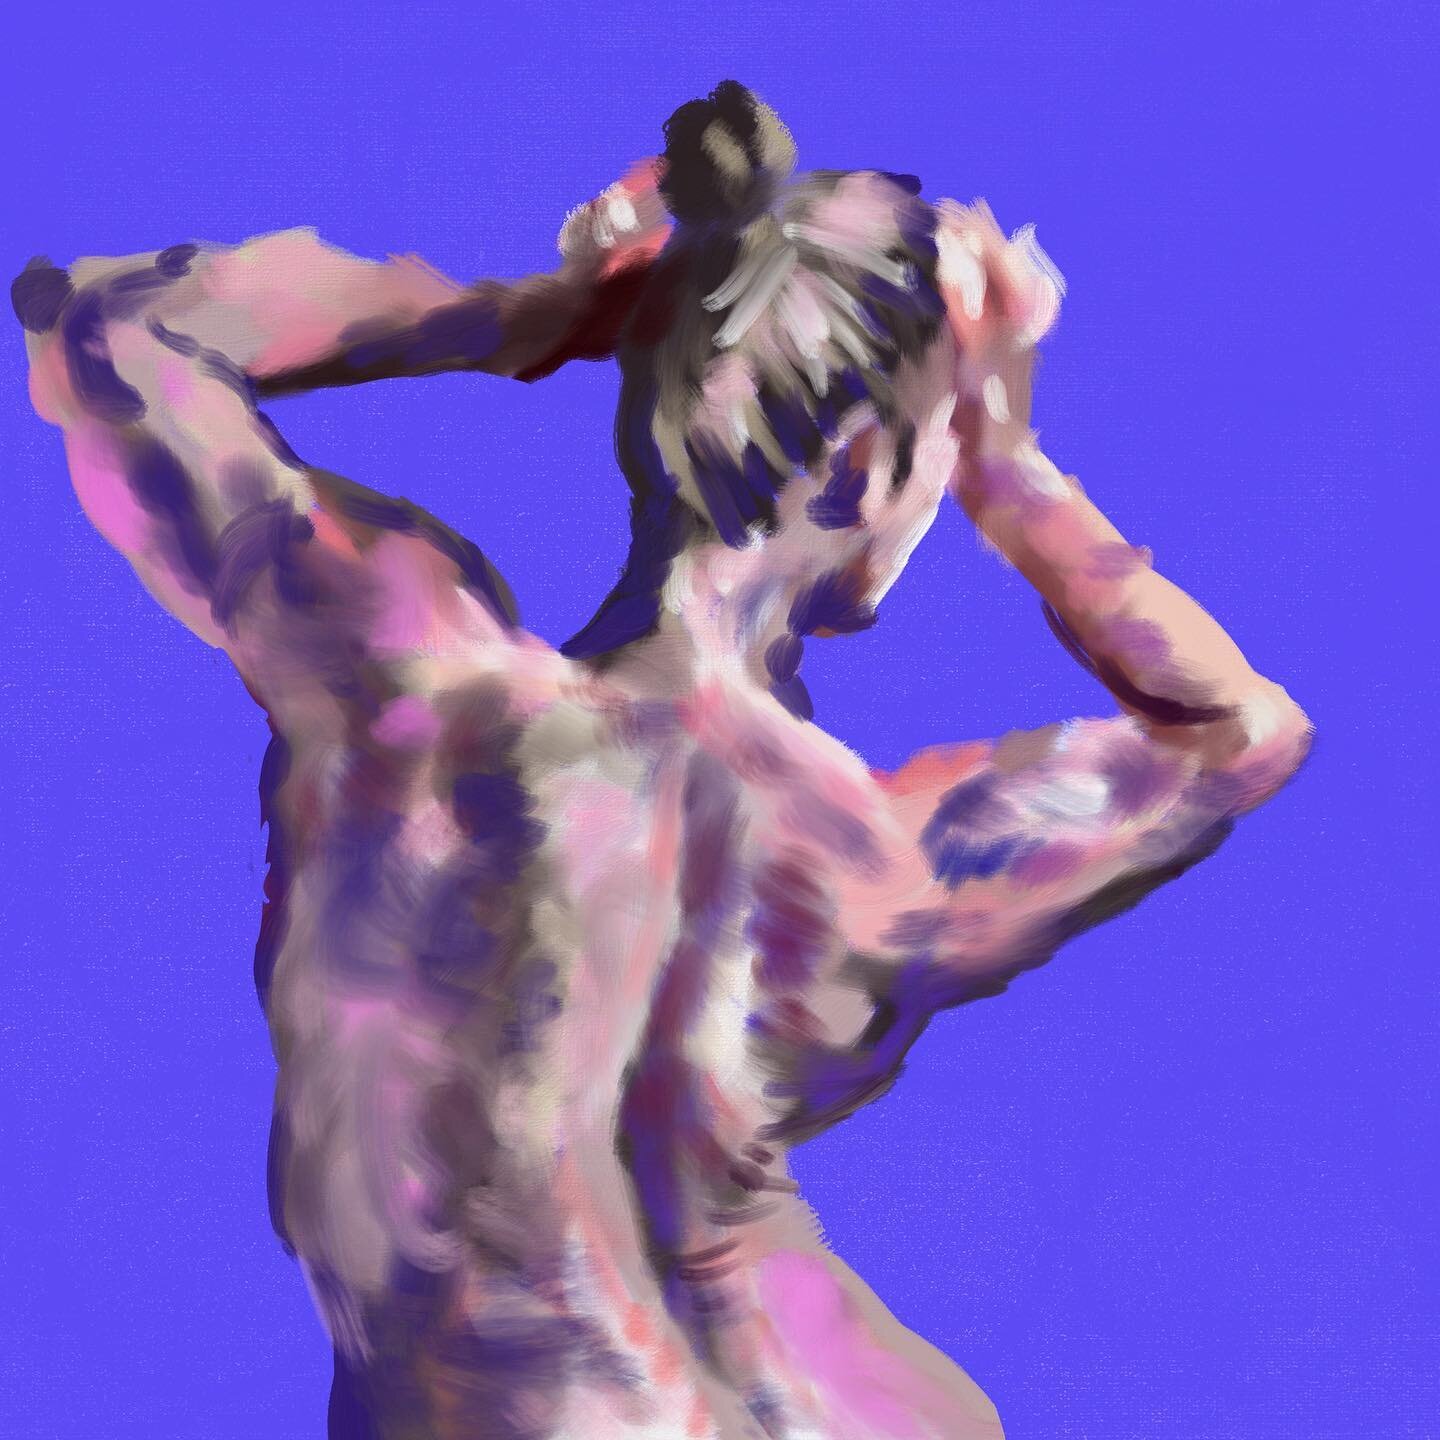 #figuary2022 day 7 &mdash; great back muscles from Artistic Physique. Enjoyed using the Canvas brush for quick poses, but not for anything else. More experiments with oil and colour palette for long one.
.
.
#figuary #figuary2022day7 #figuredrawing #